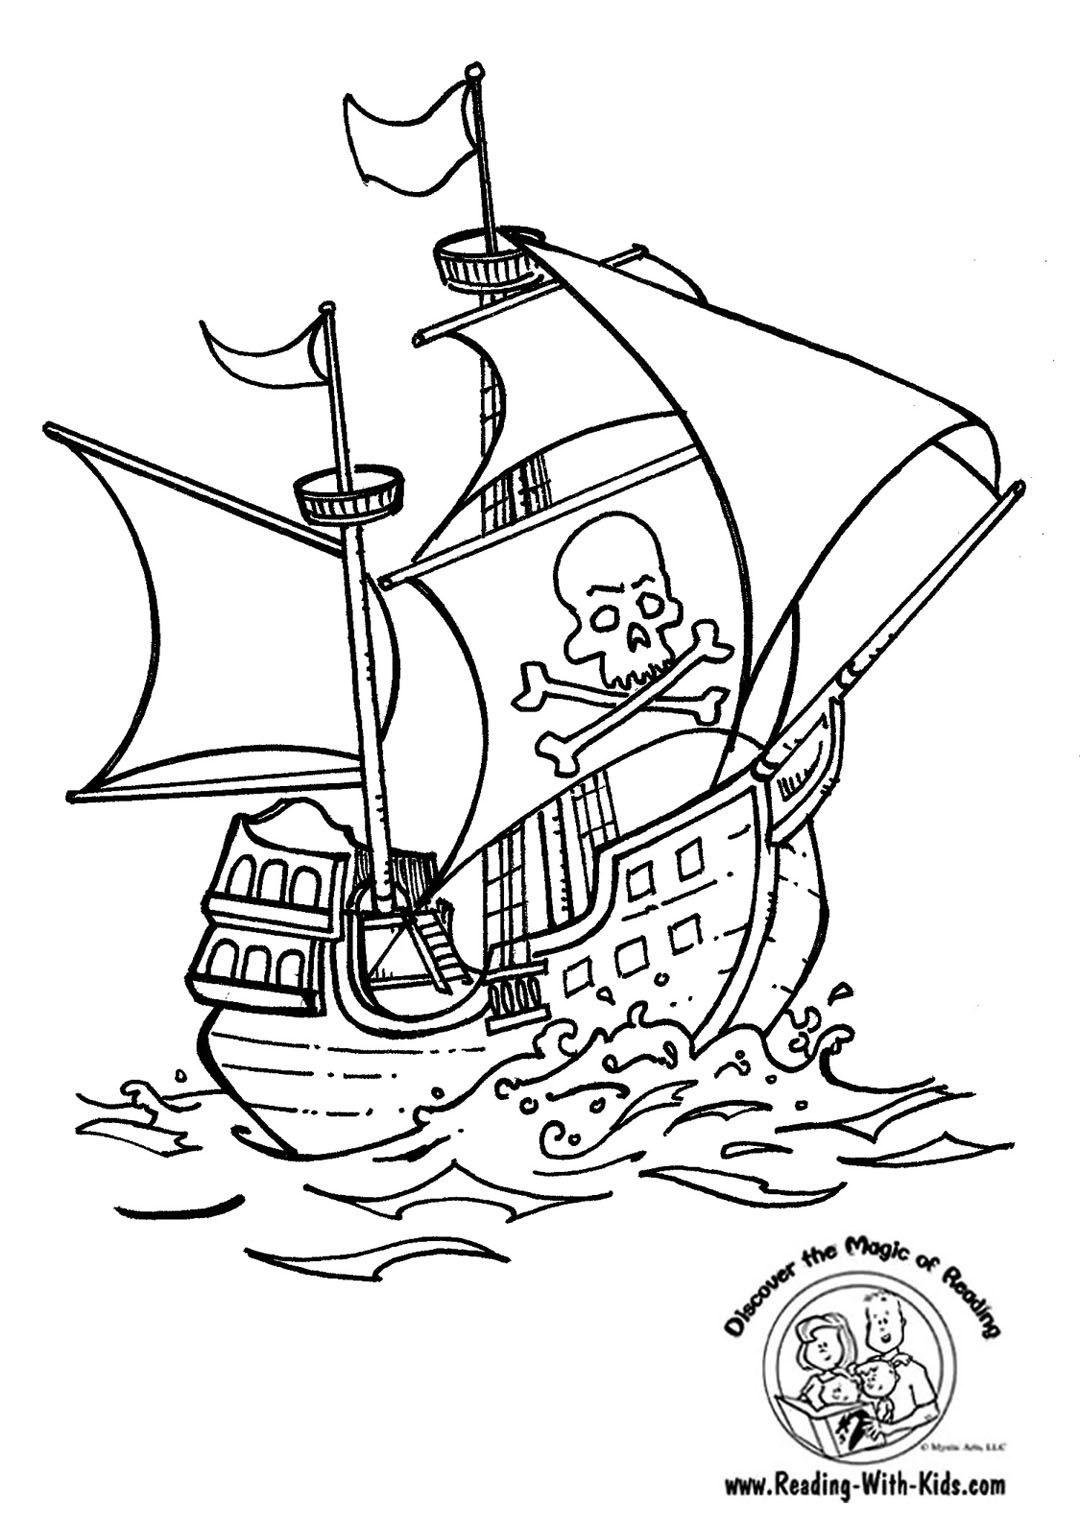 pirate ship to color color kid stuff free coloring pages for kids part 2 pirate to ship color 